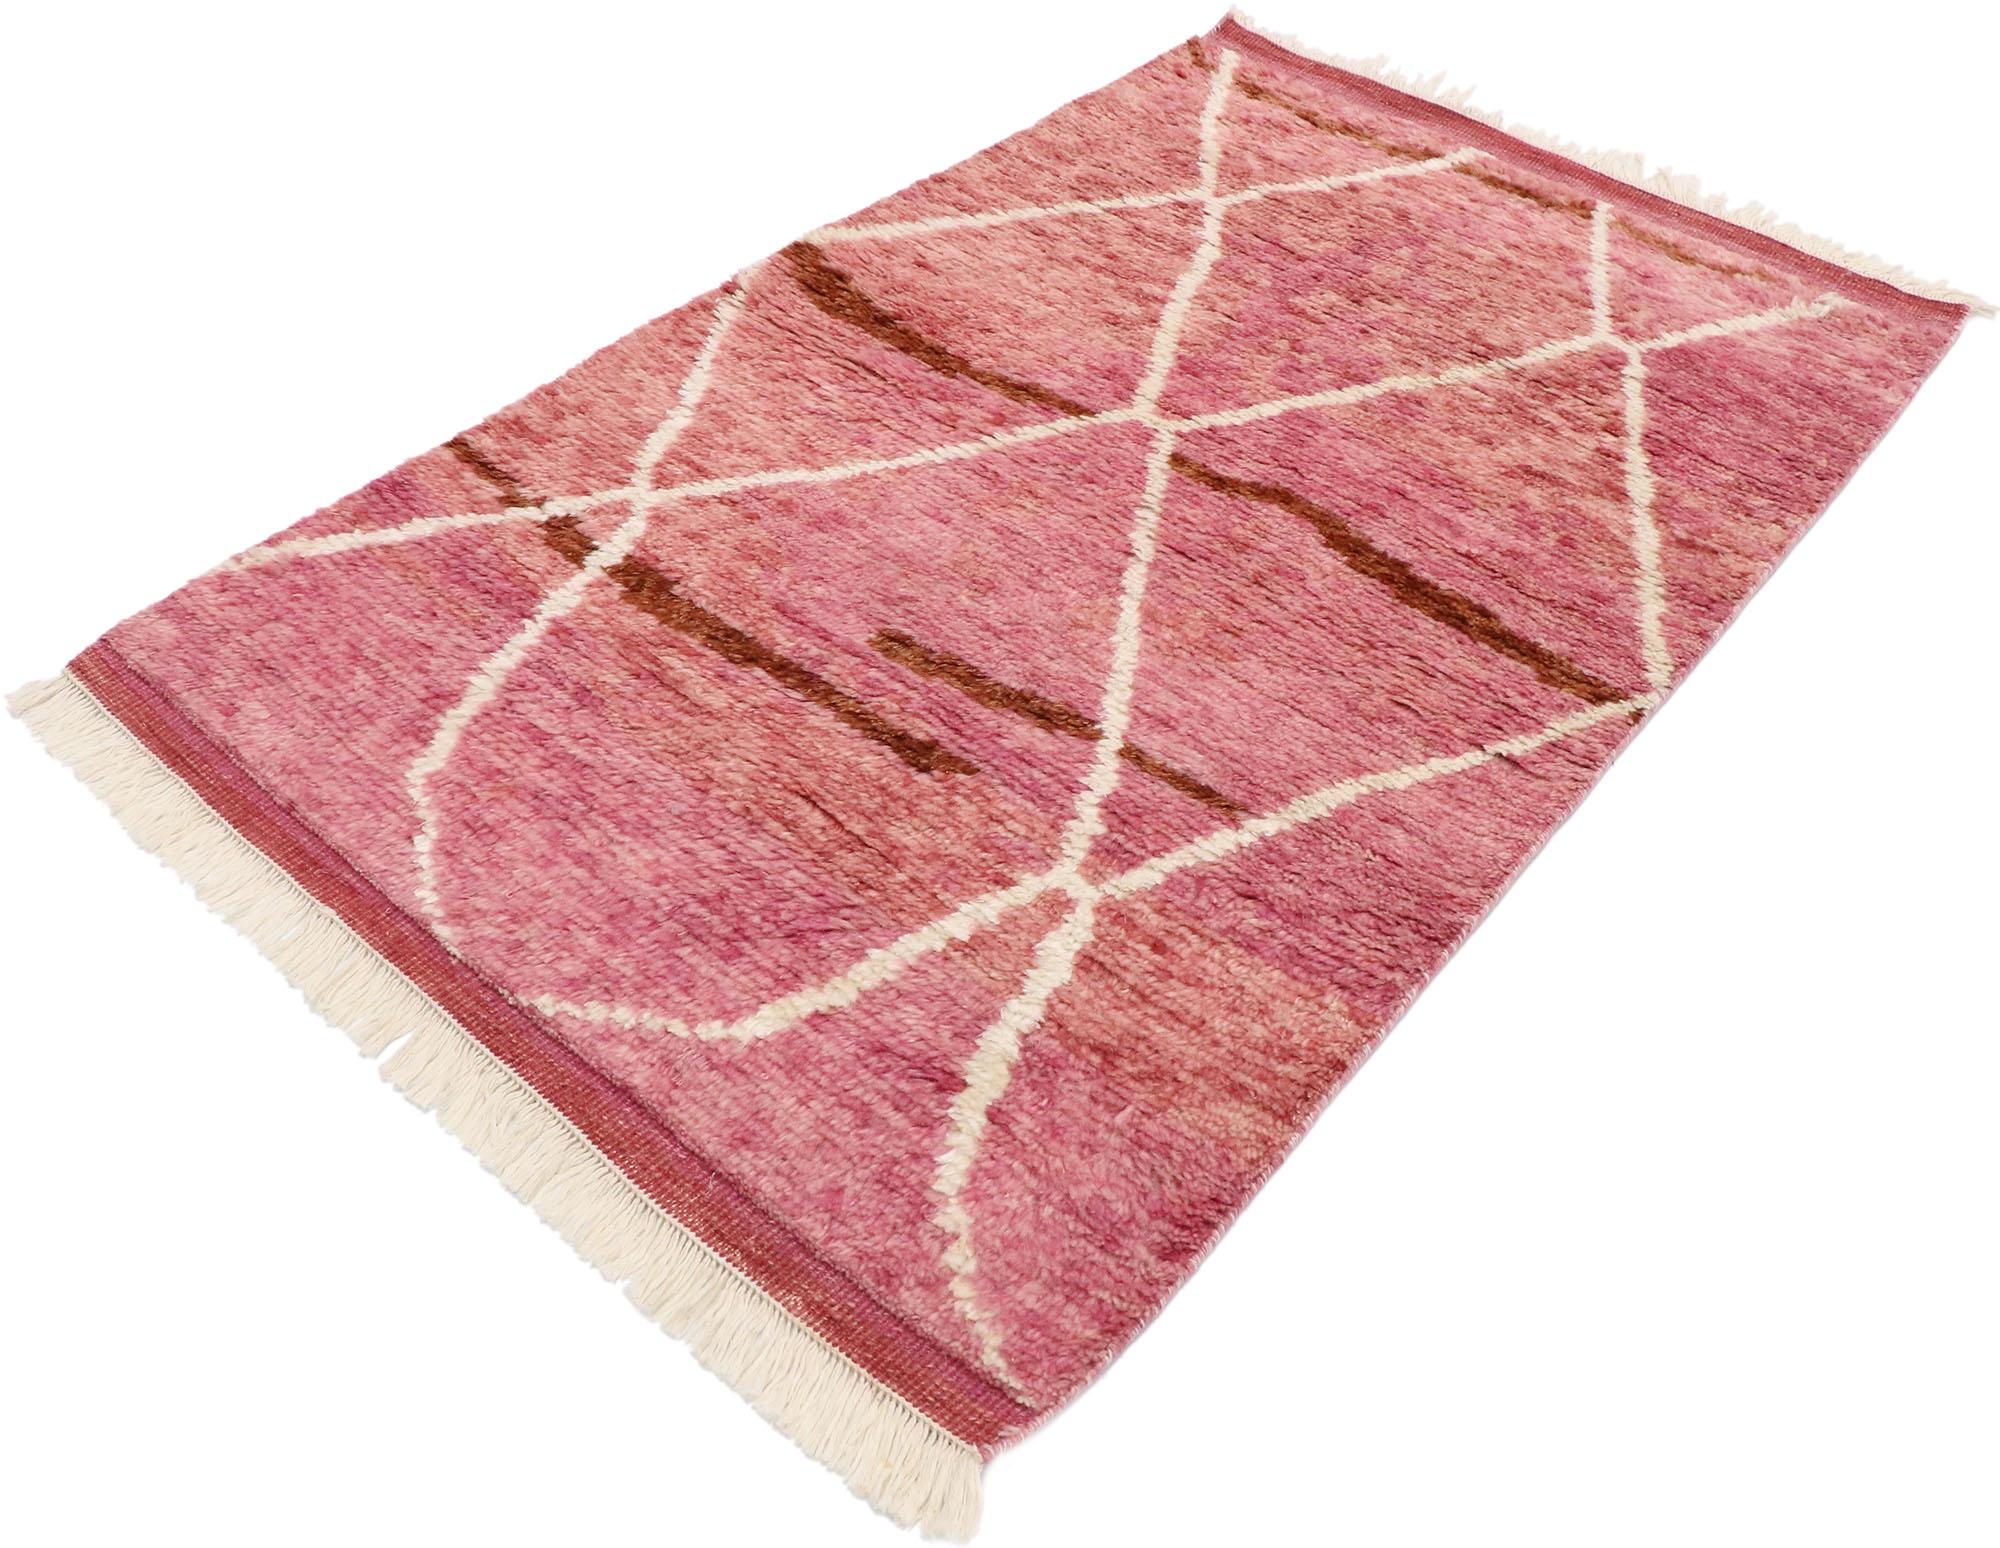 30597, new contemporary Moroccan style rug with Modern Bohemian style 03'02 x 05'03. This hand knotted wool new contemporary Moroccan style rug features an all-over diamond lattice pattern spread across an abrashed pink field. The lines of this